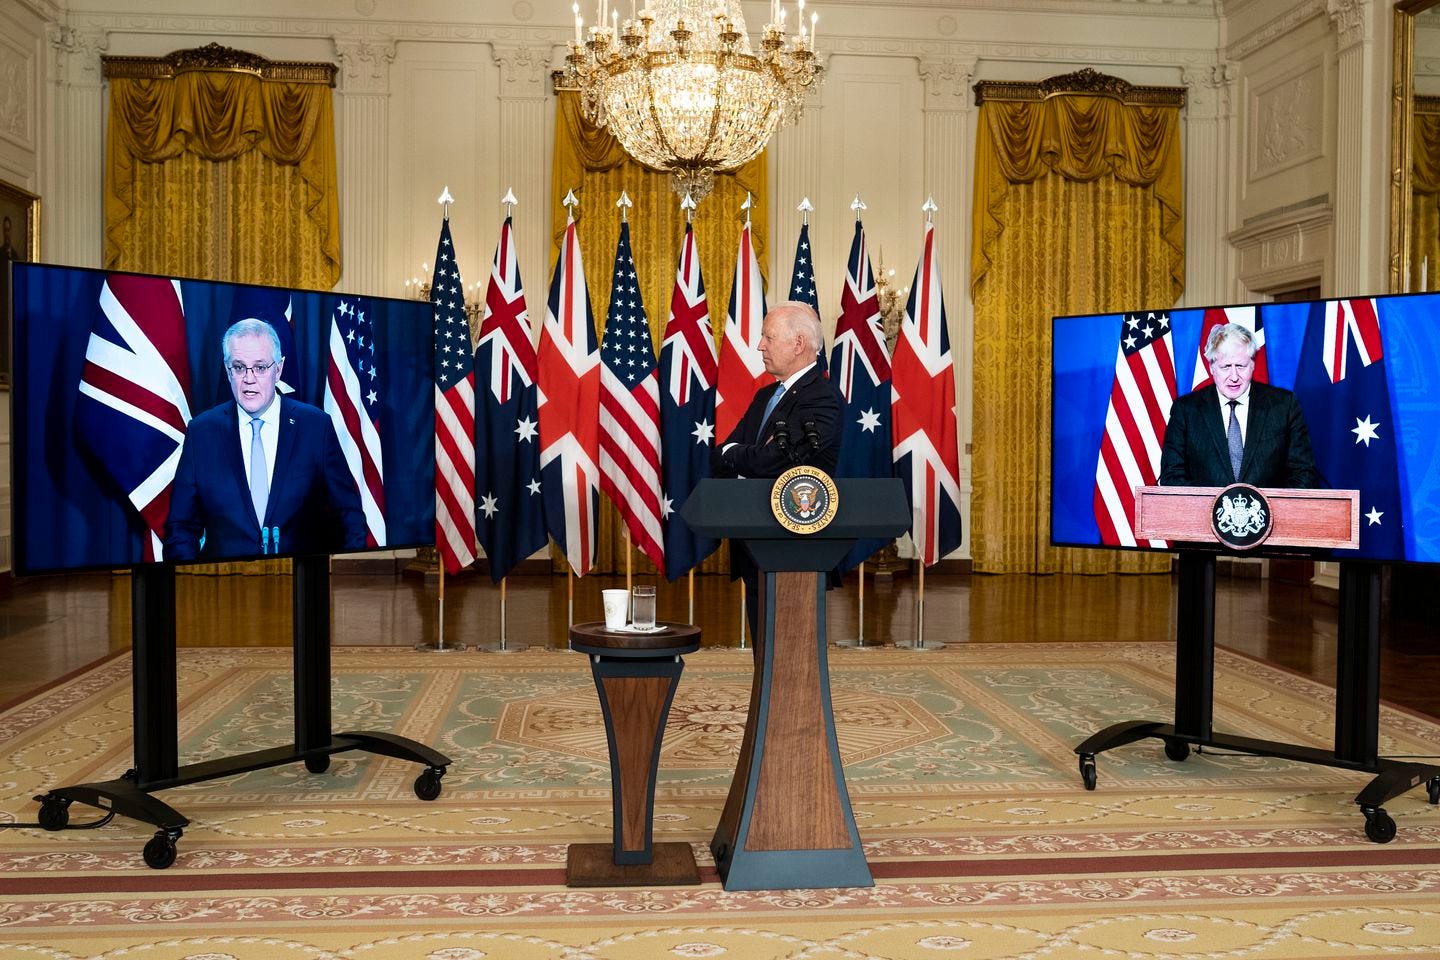 President Joe Biden, participates in a videoconference with Prime Minister Scott Morrison of Australia, left, and Prime Minister Boris Johnson of the United Kingdom, from the White House in Washington on Wednesday, Sept.15, 2021. France reacted with fury on Thursday to President Biden’s announcement of a deal to help Australia deploy nuclear-powered submarines, calling it a “unilateral, brutal, unpredictable decision” that resembled the rash and sudden policy shifts common during the Trump administration.